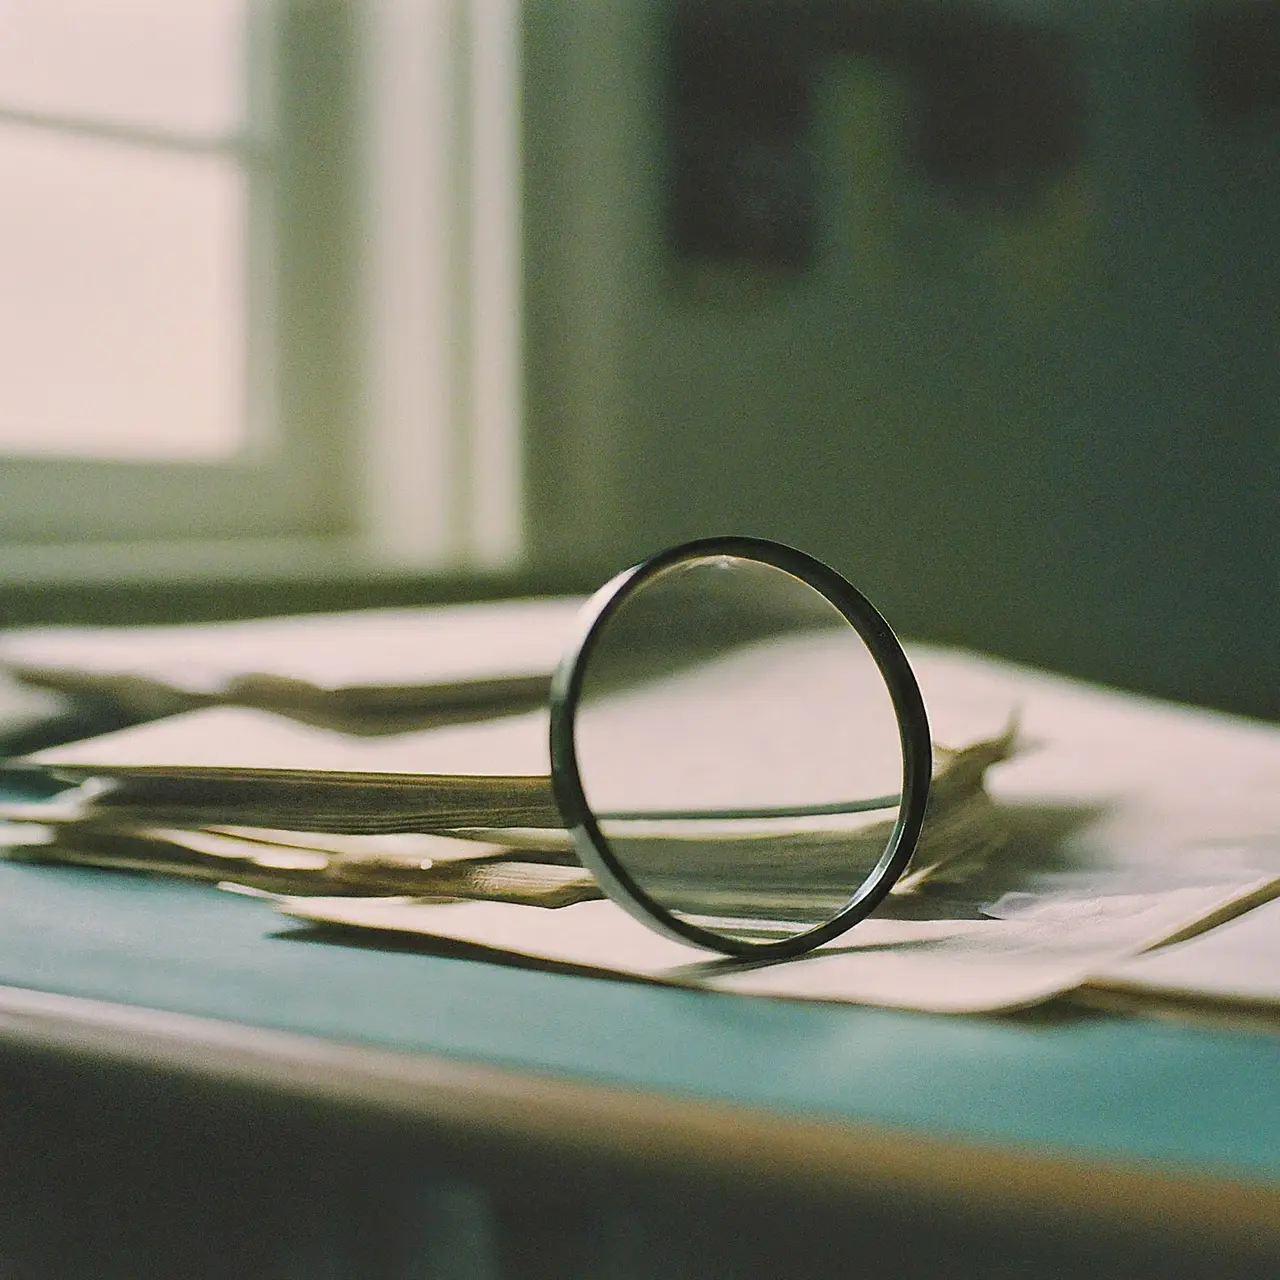 A close-up of a magnifying glass on various documents. 35mm stock photo